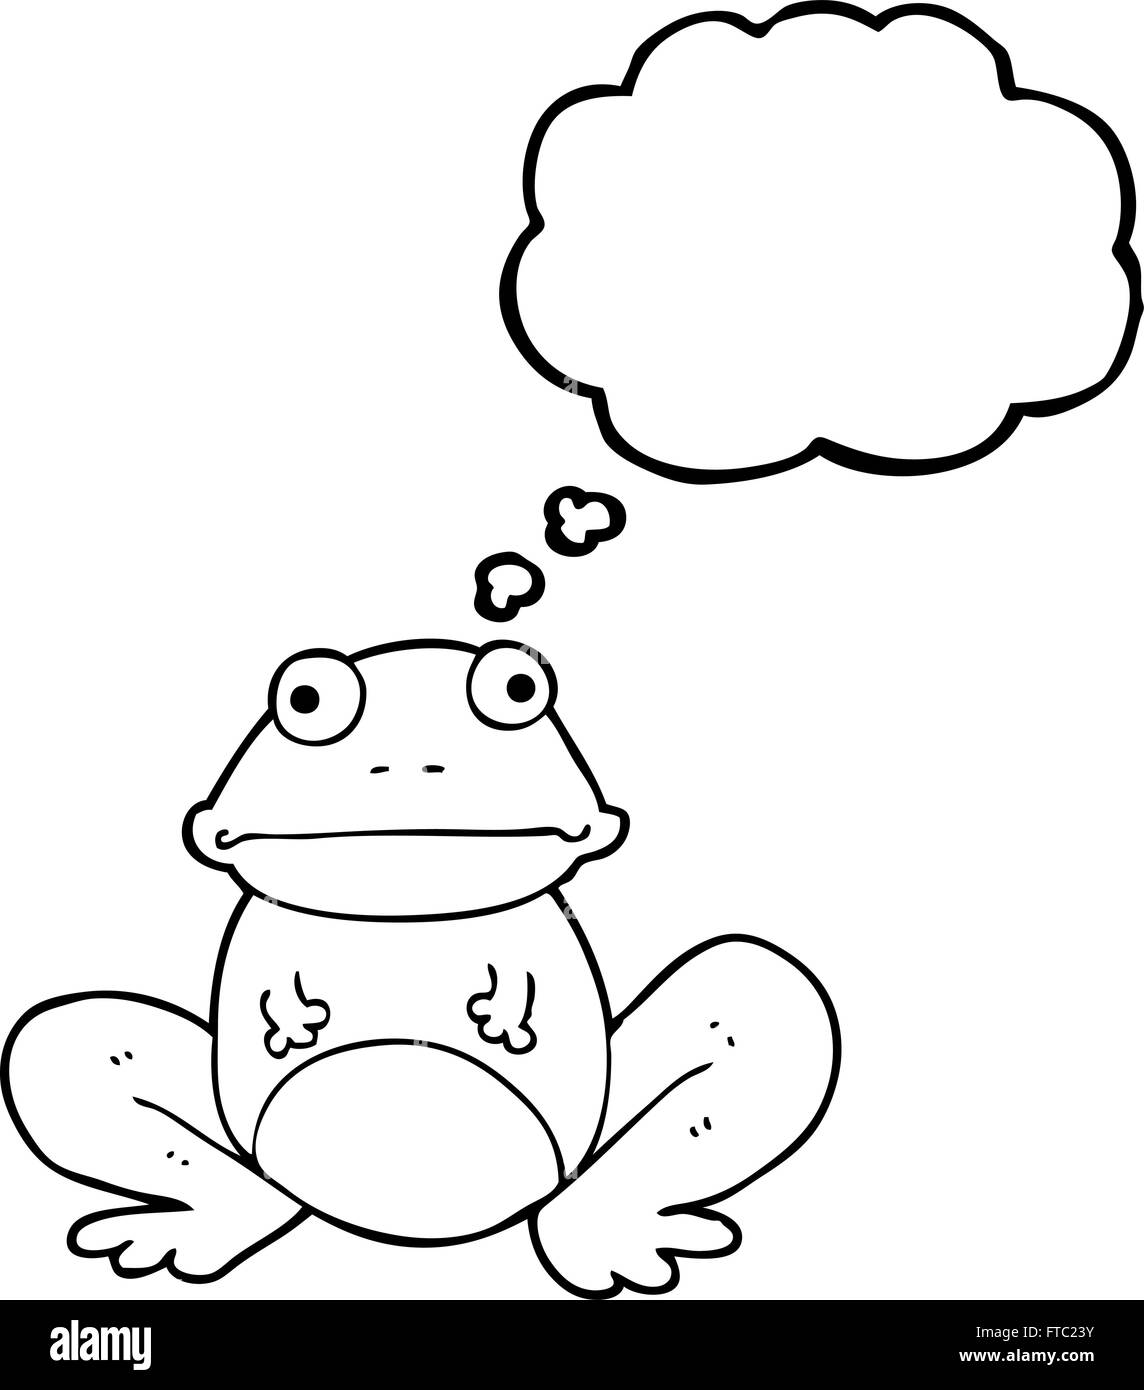 freehand drawn thought bubble cartoon frog Stock Vector